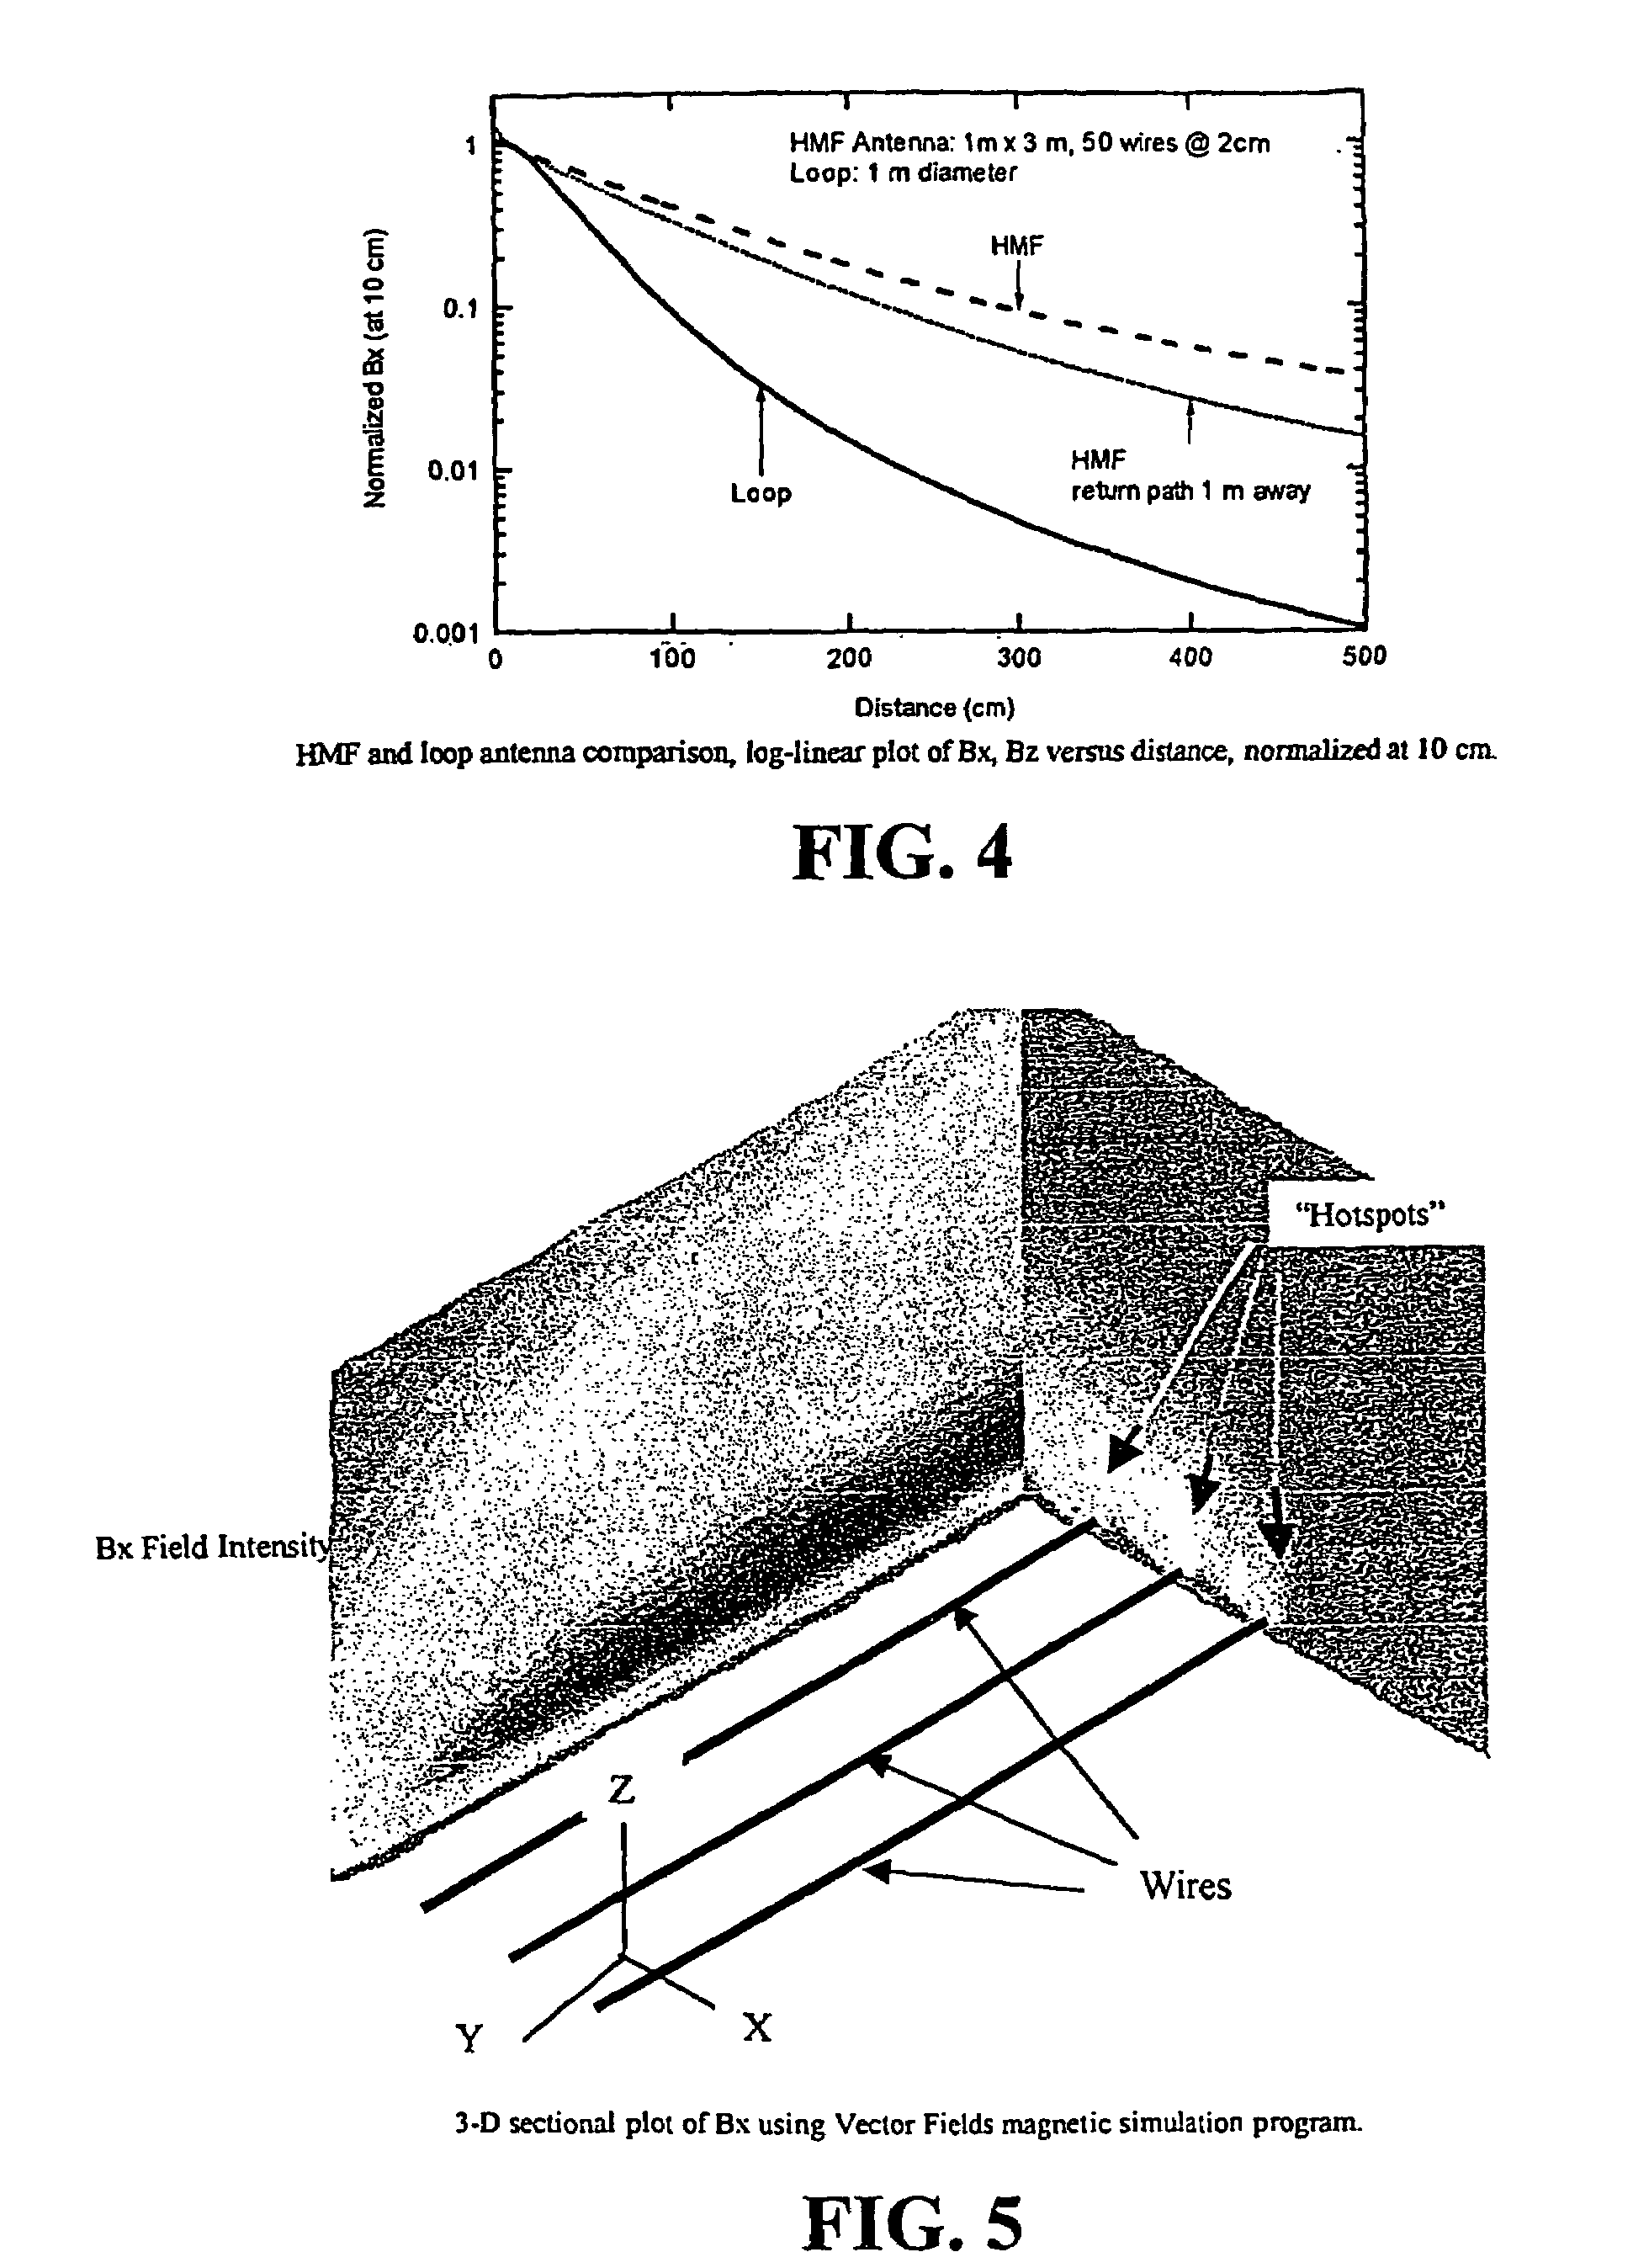 Method for metal object identification using a three-dimensional steerable magnetic field antenna